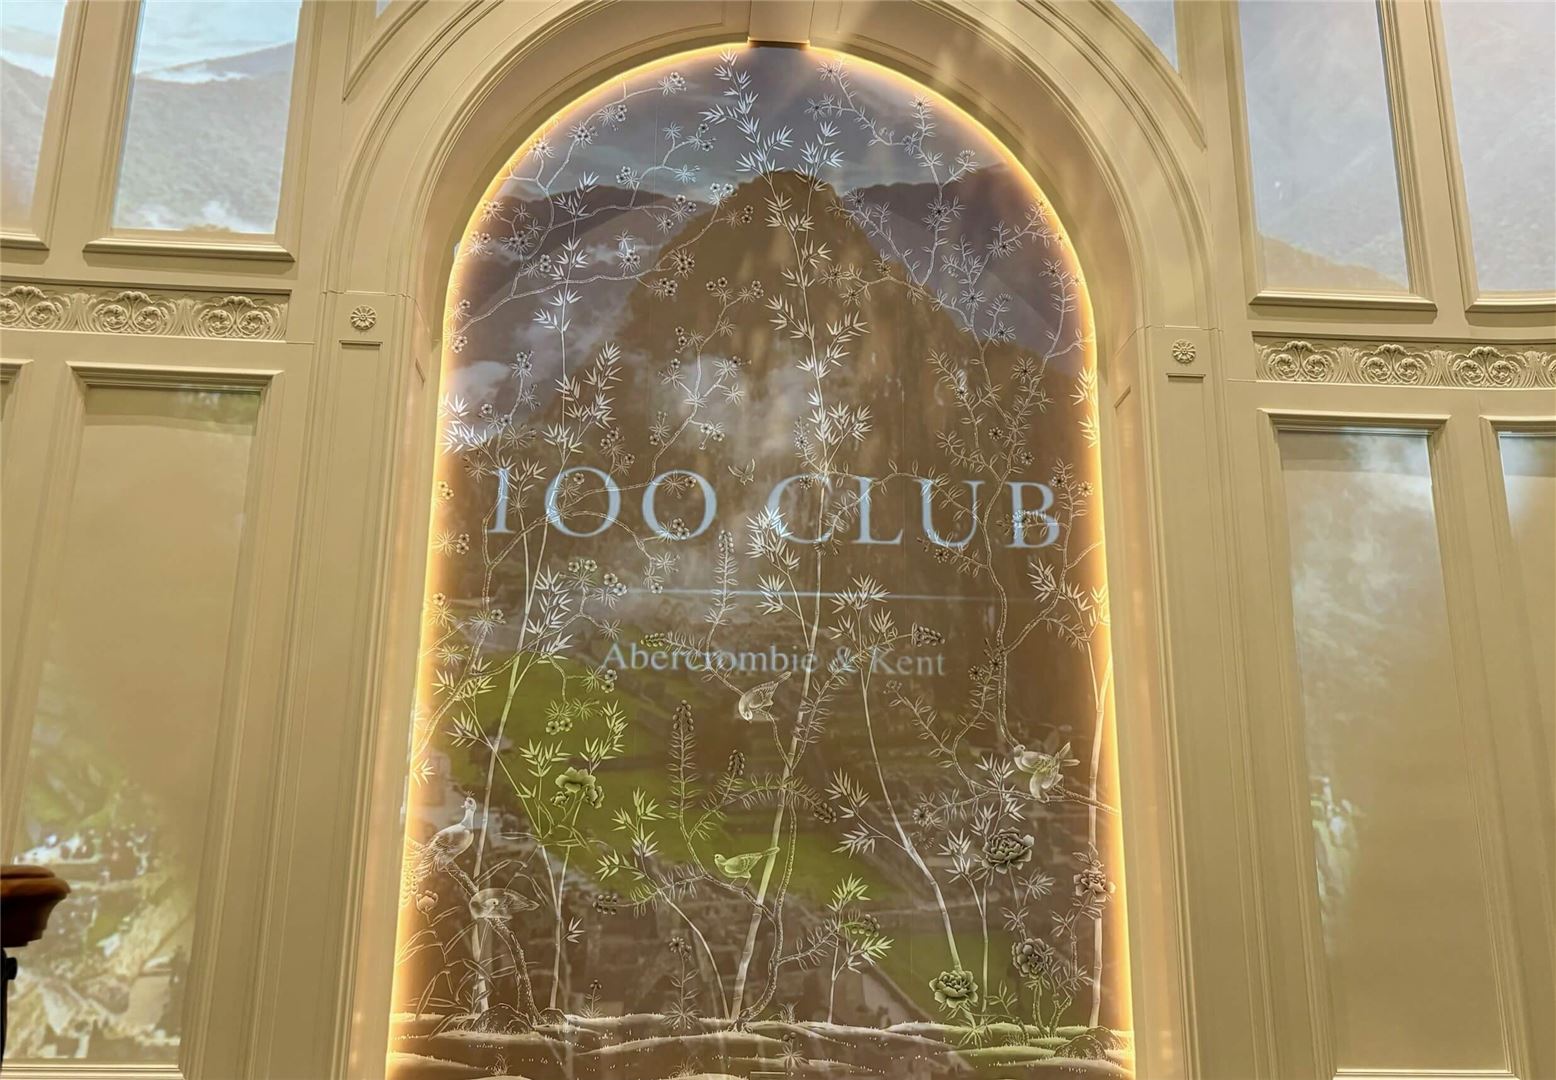 100 Club Abercrombie and Kent 